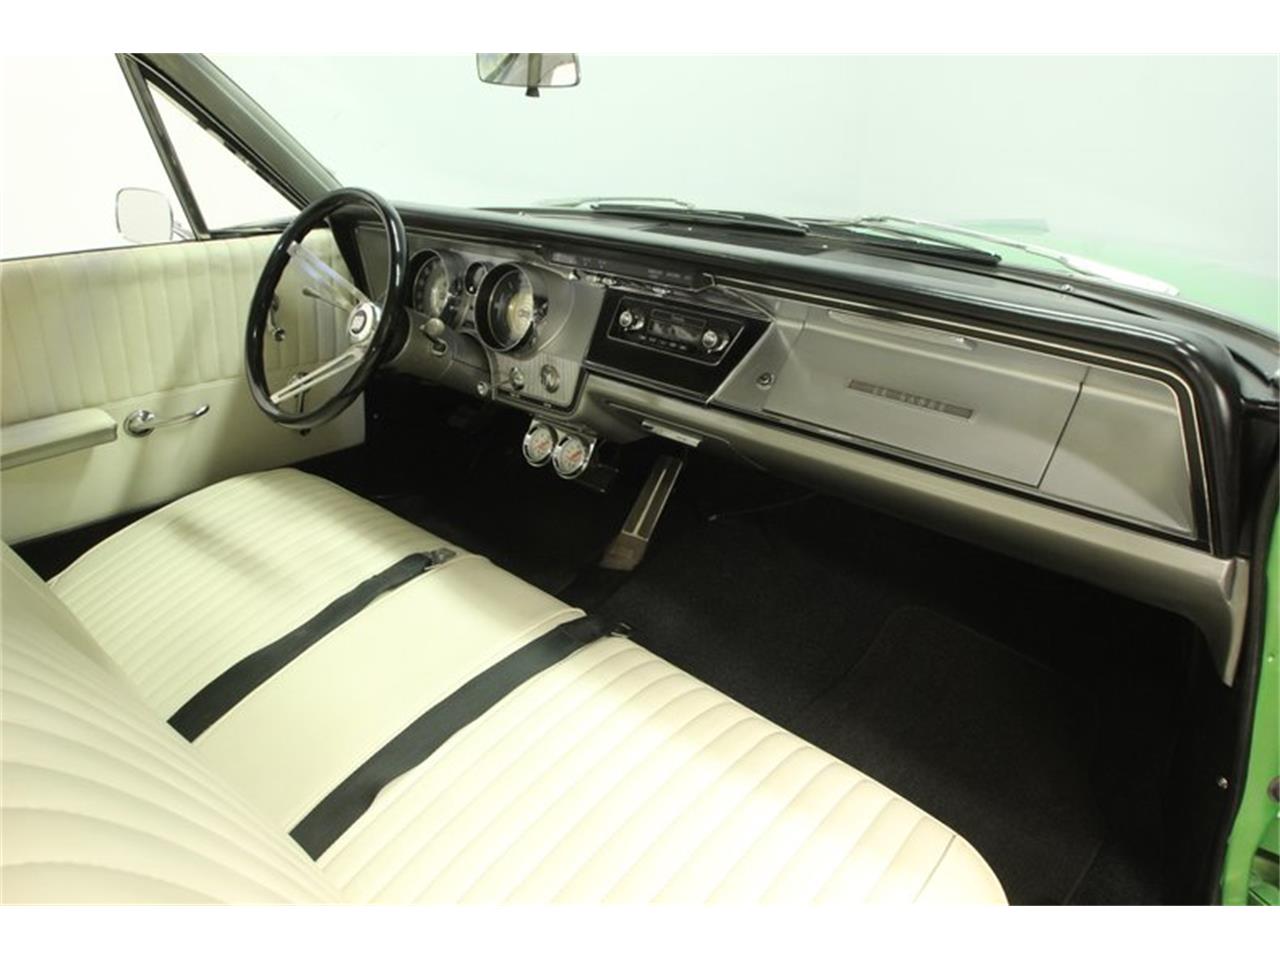 1964 Buick LeSabre for sale in Lutz, FL – photo 56